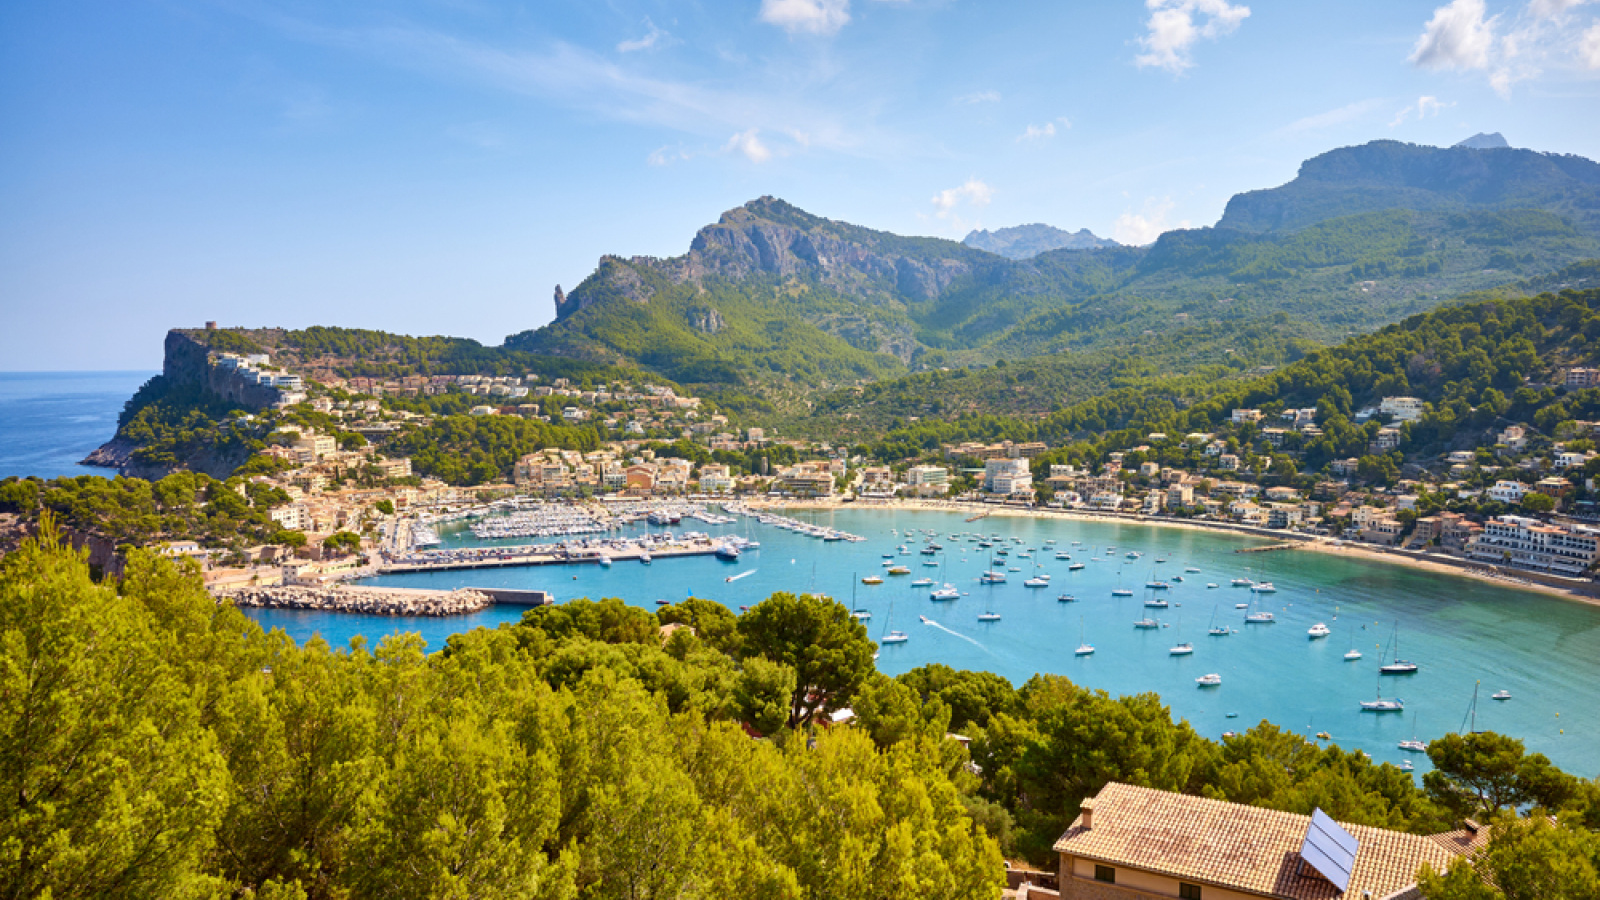 What to see in Sóller – one of the most beautiful towns in Mallorca and the  Tramuntana mountains